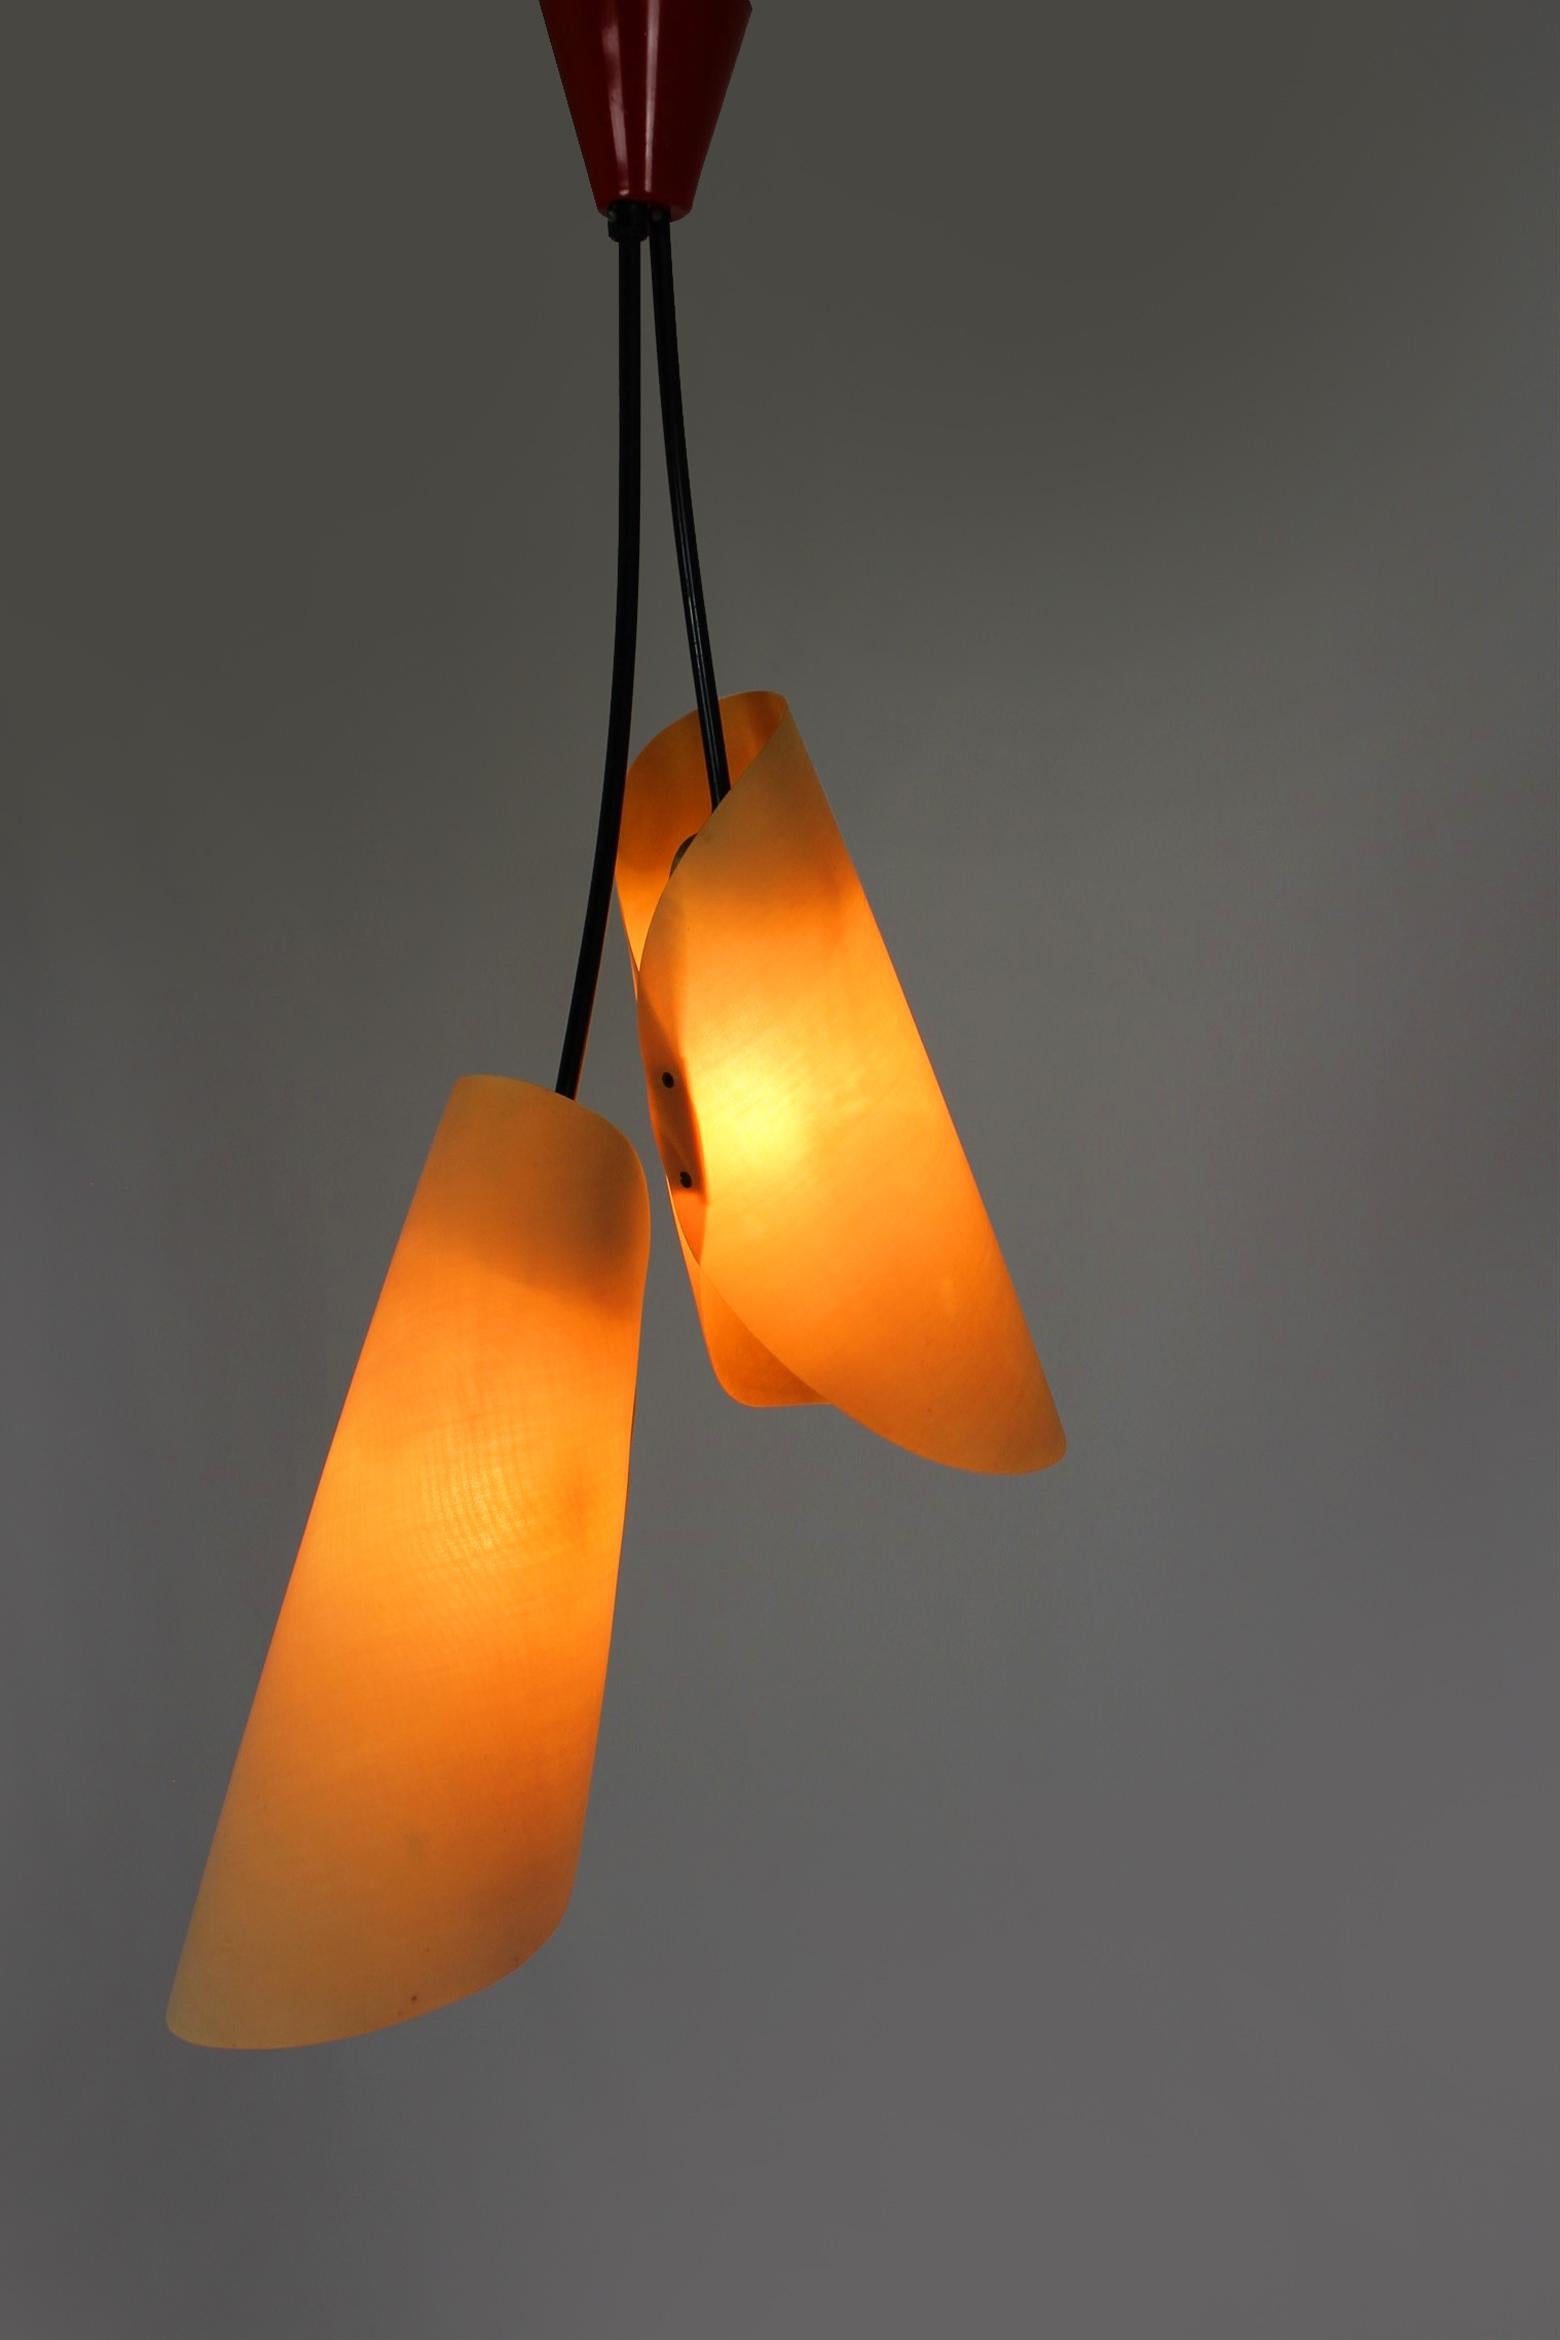 Steel Mid-Century Pendant Lamp by Josef Hurka for Napako, 1960s For Sale